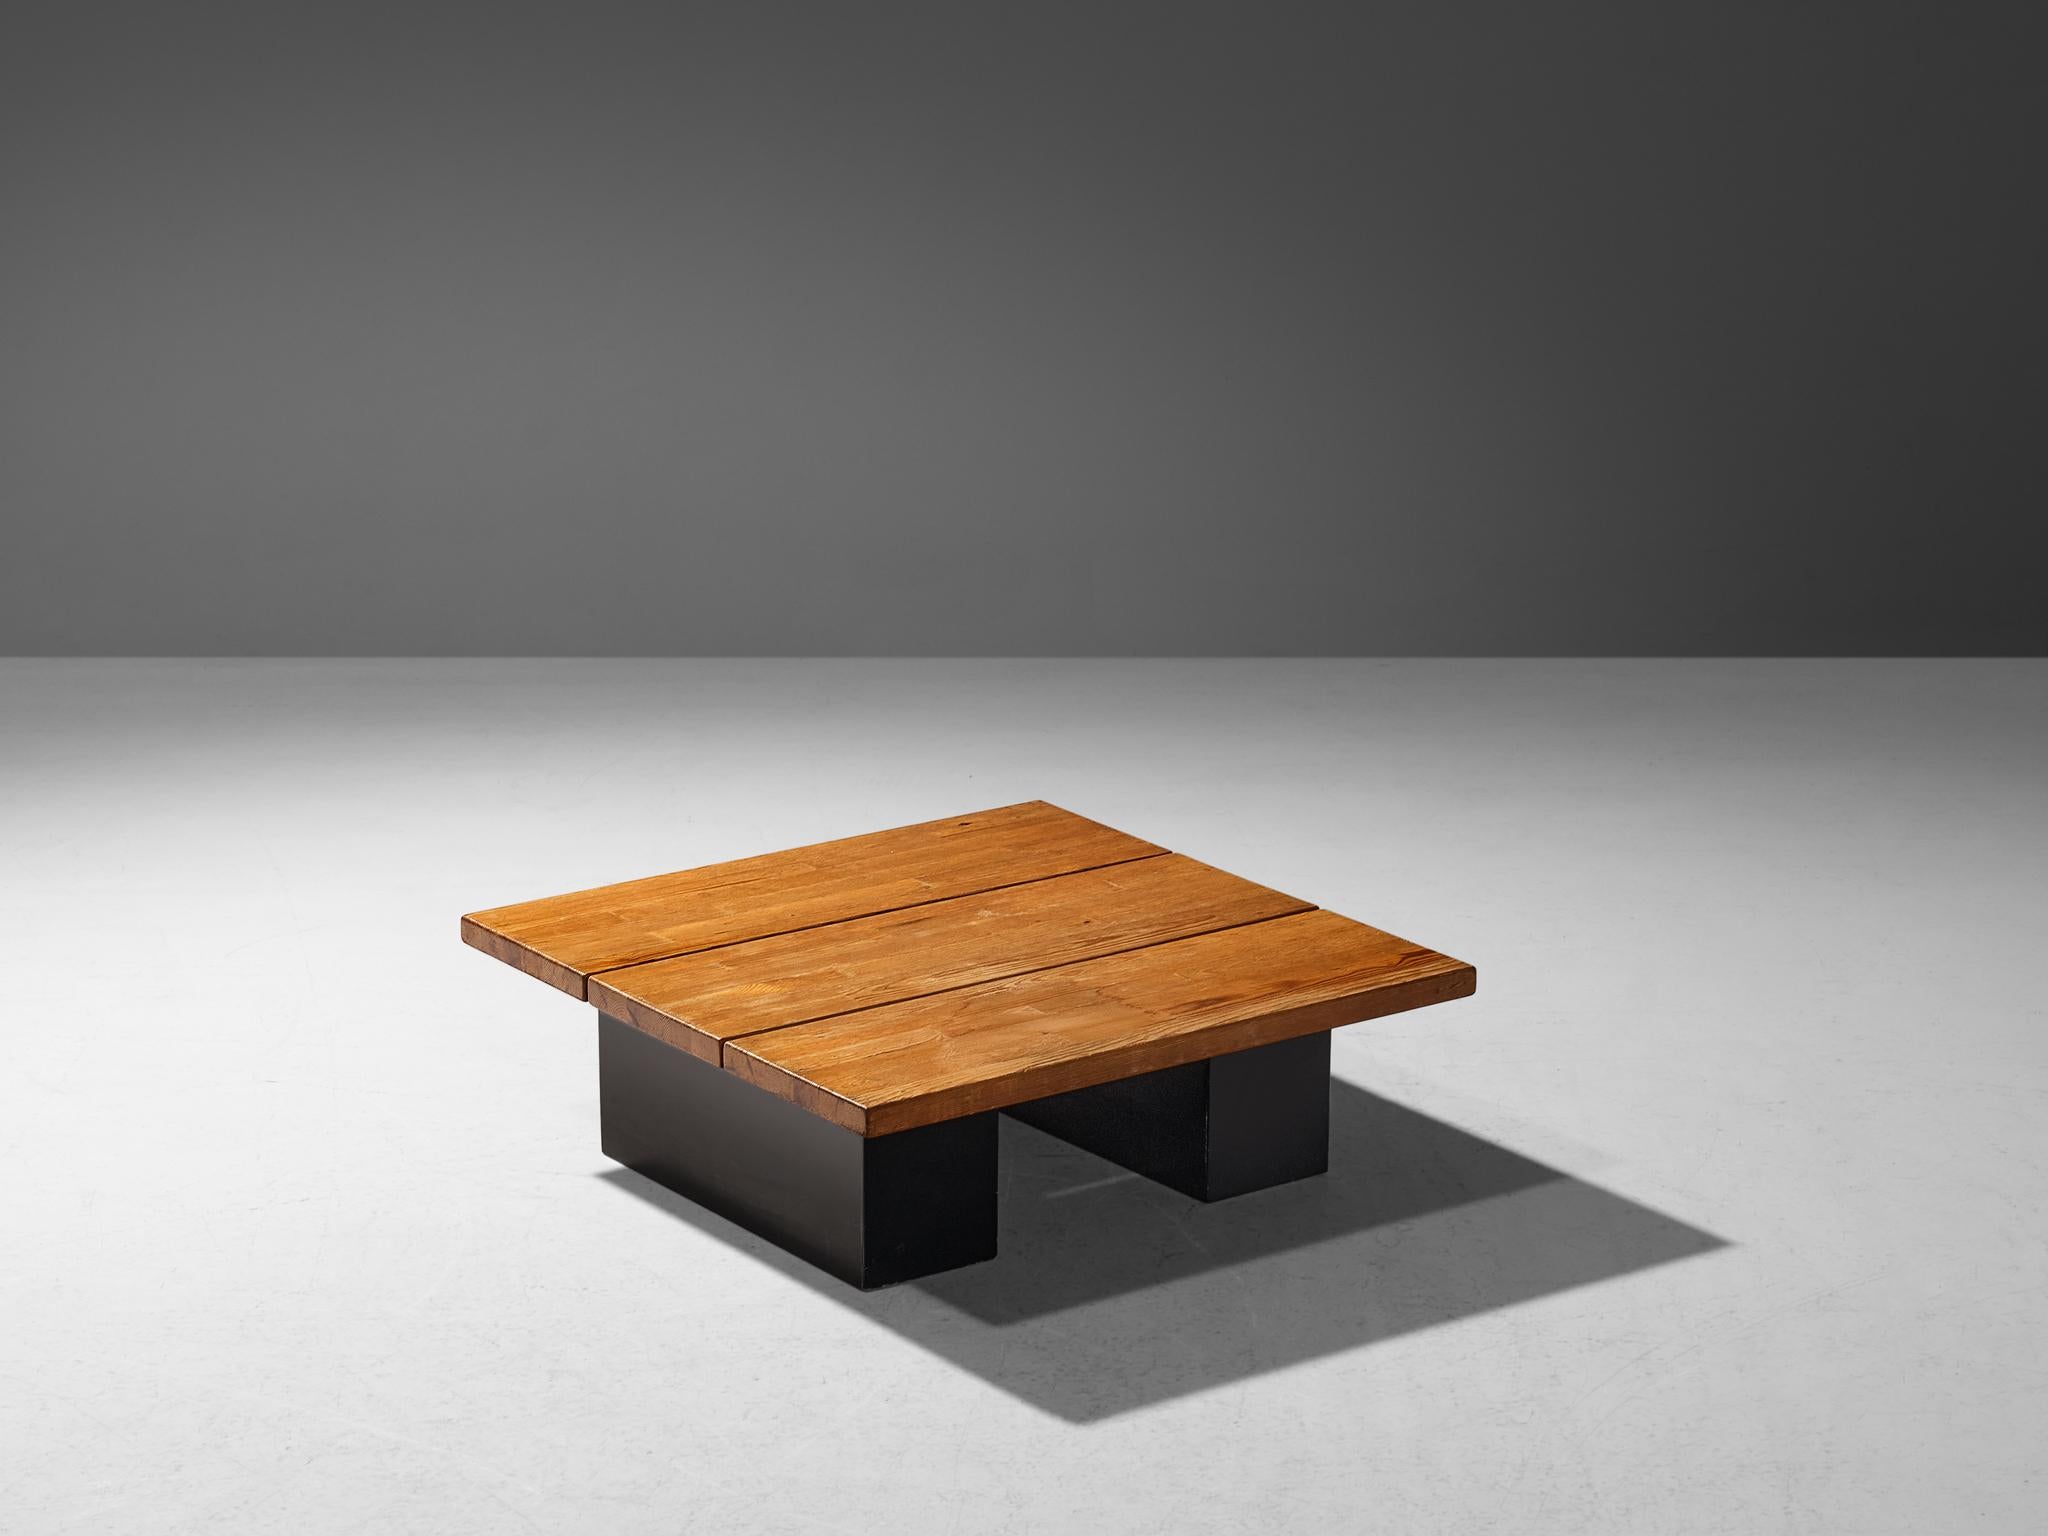 Ilmari Tapiovaara for Laukaan Puu, side table, model 'Pirkka', pine, lacquered wood, Finland, 1950

This pine coffee table is modest and simple in its design and a true ambassador of the Nordic style. This means that it is well-constructed as can